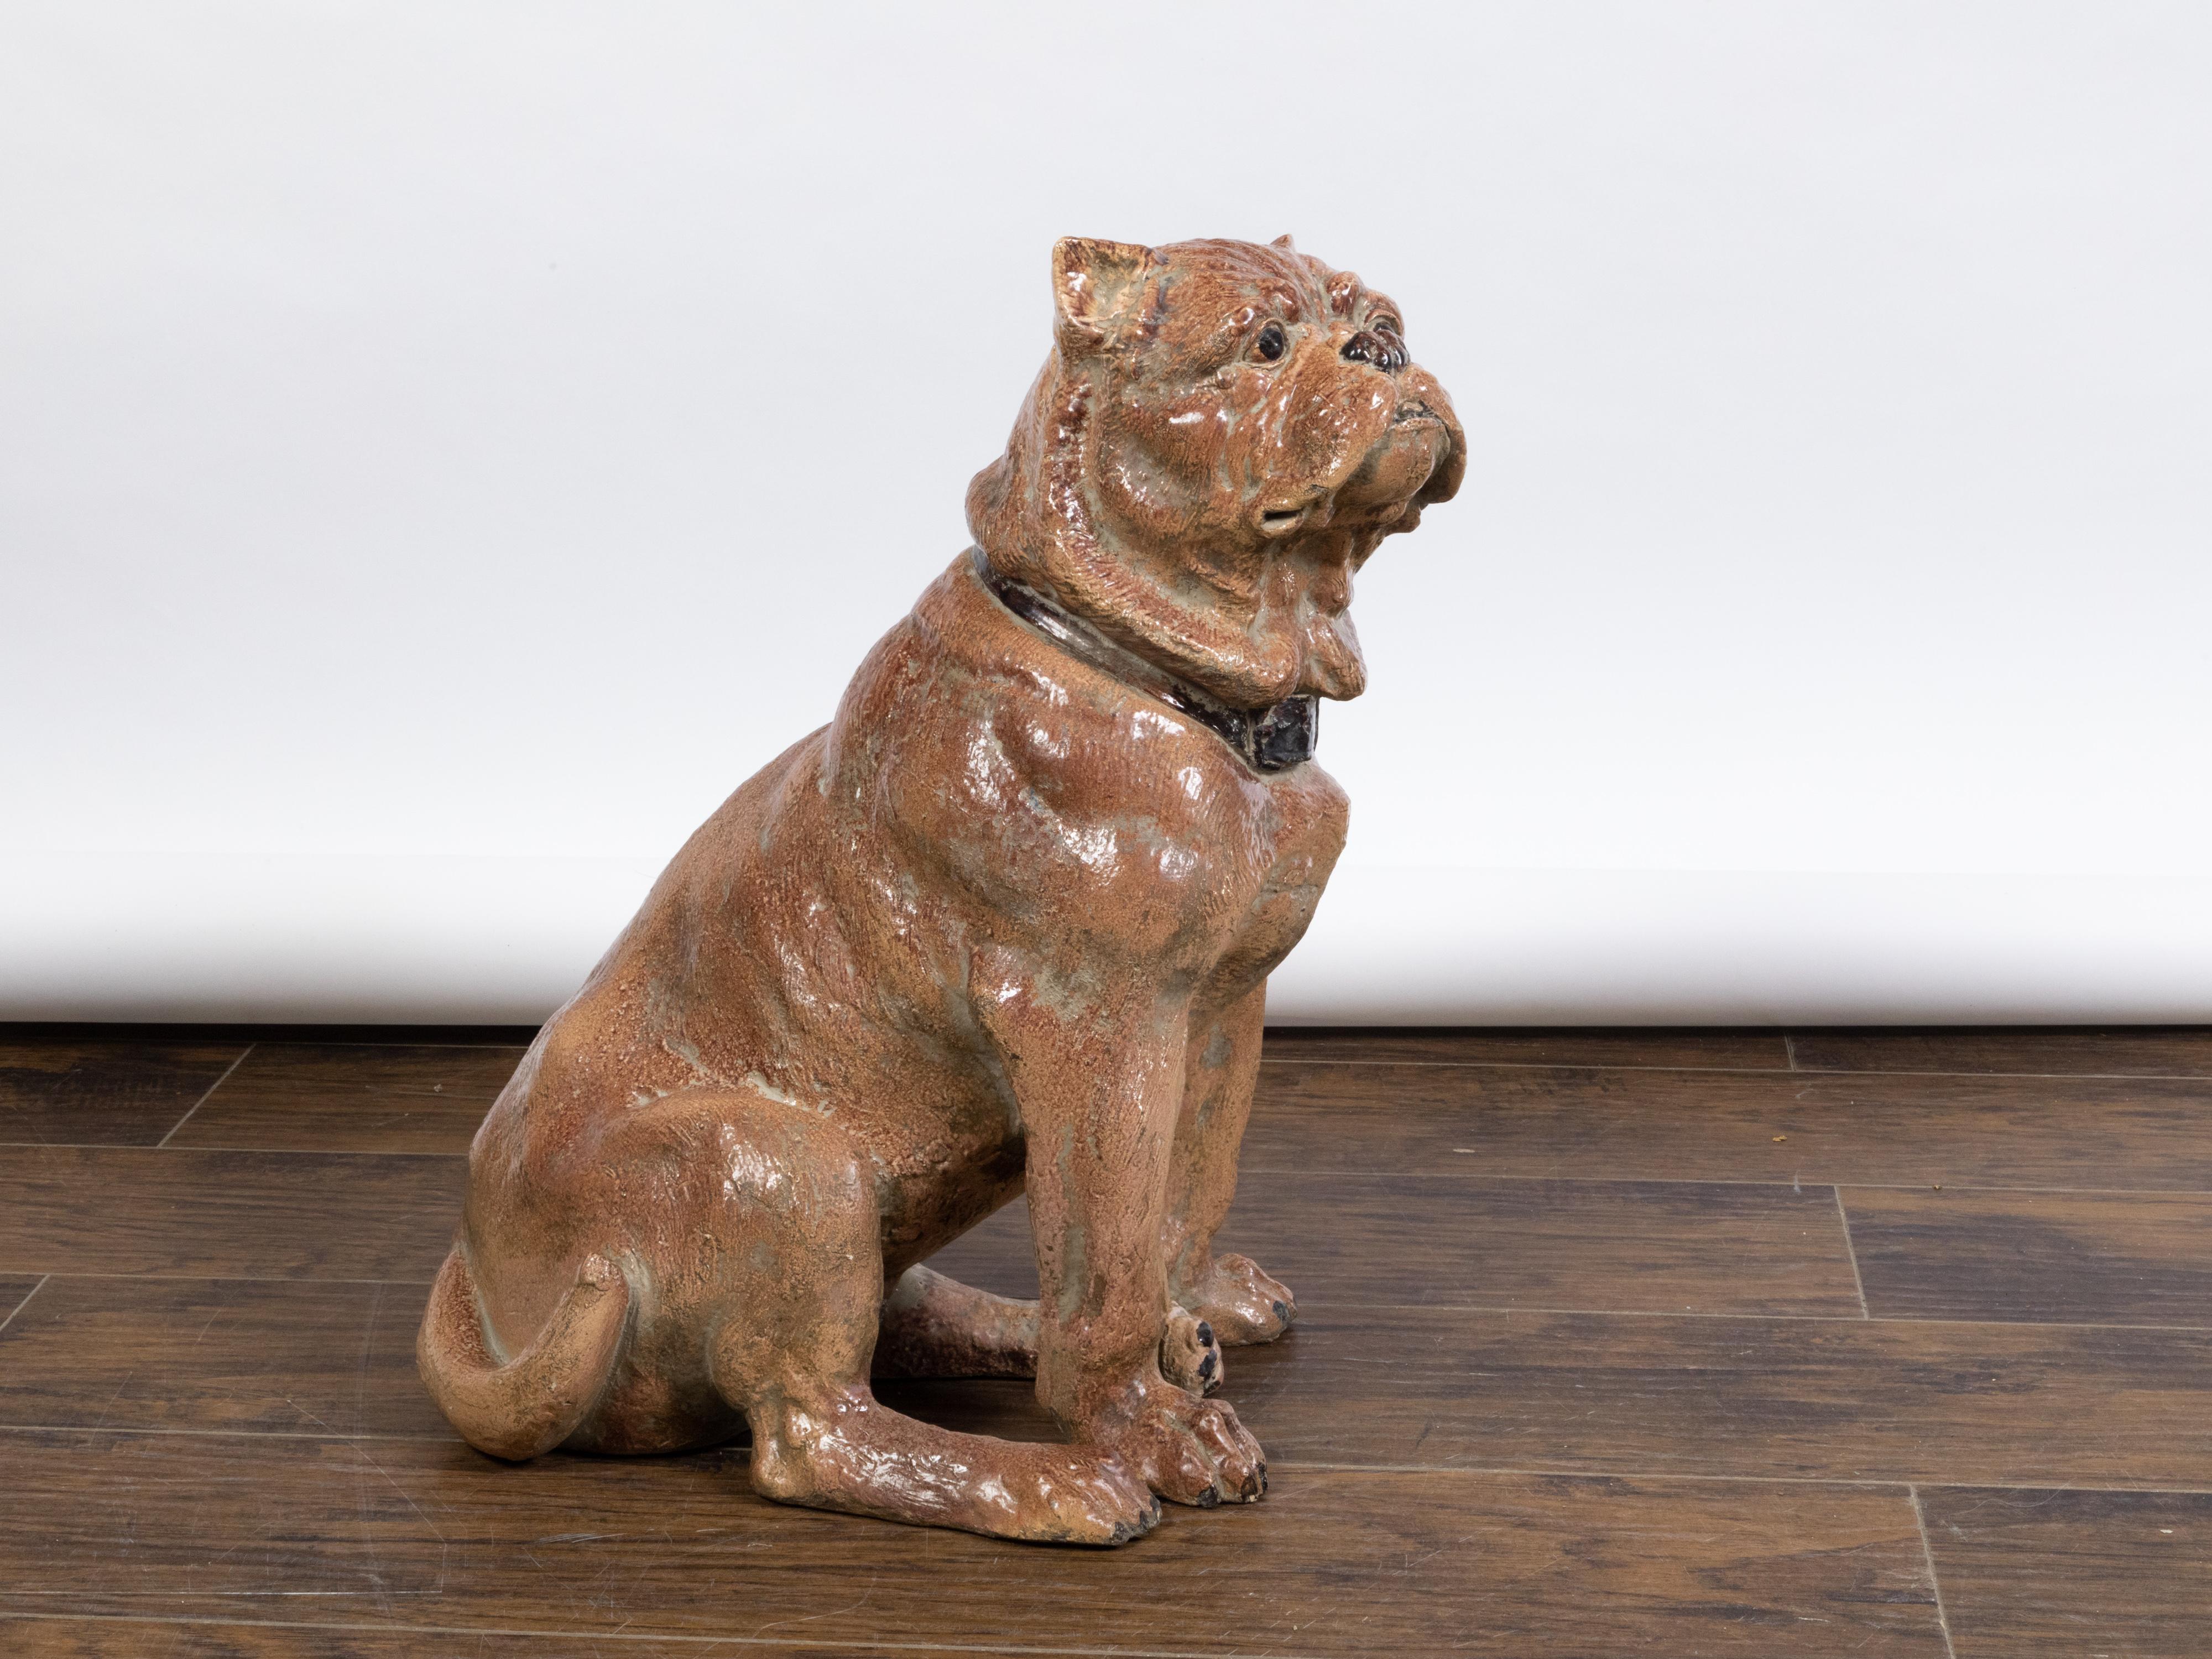 An English vintage pottery bulldog statue from the mid 20th century, with black collar. Created in England during the midcentury period, this statue depicts a brown hair bulldog seating obediently, his tail tucked to the side. Showcasing a stern